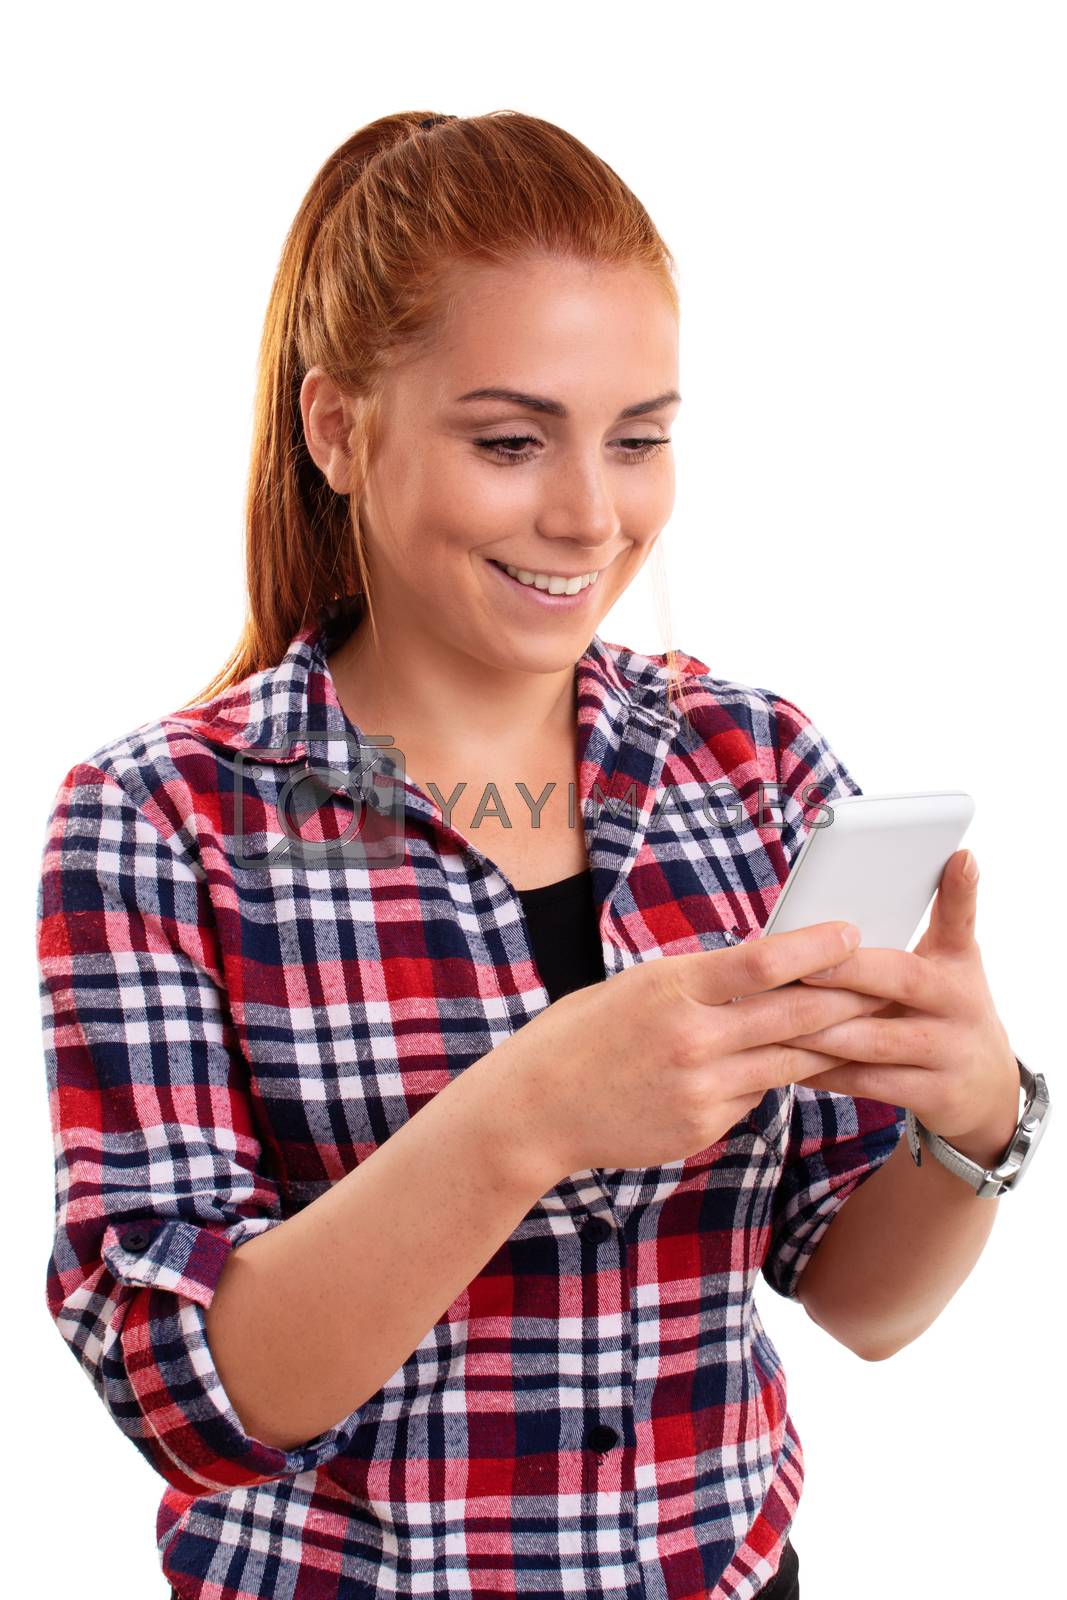 Royalty free image of Beautiful smiling young woman looking at mobile phone by Mendelex